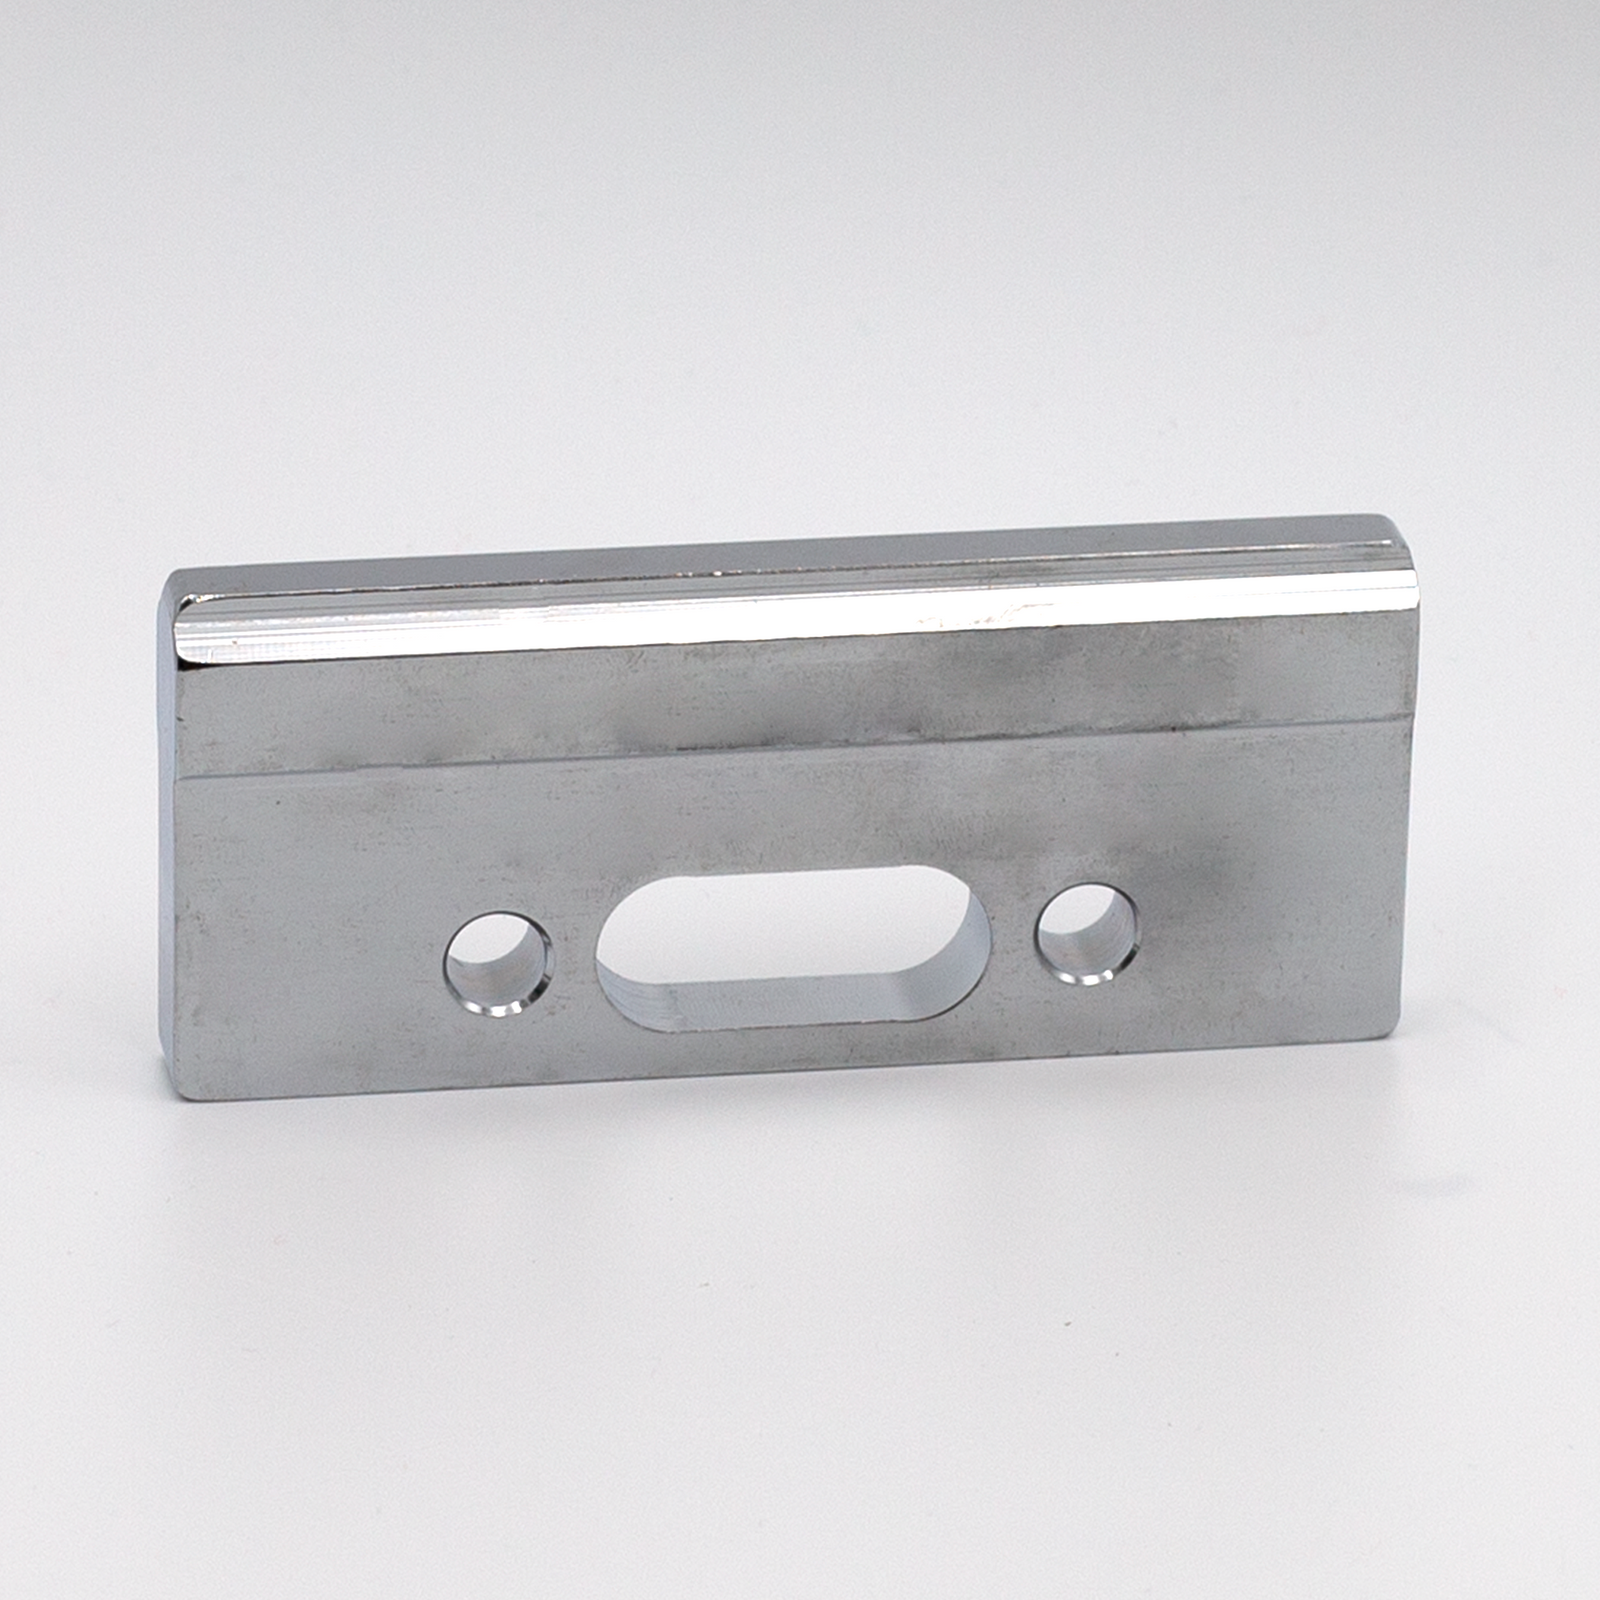 Upper heating block spare part for continuous band sealers